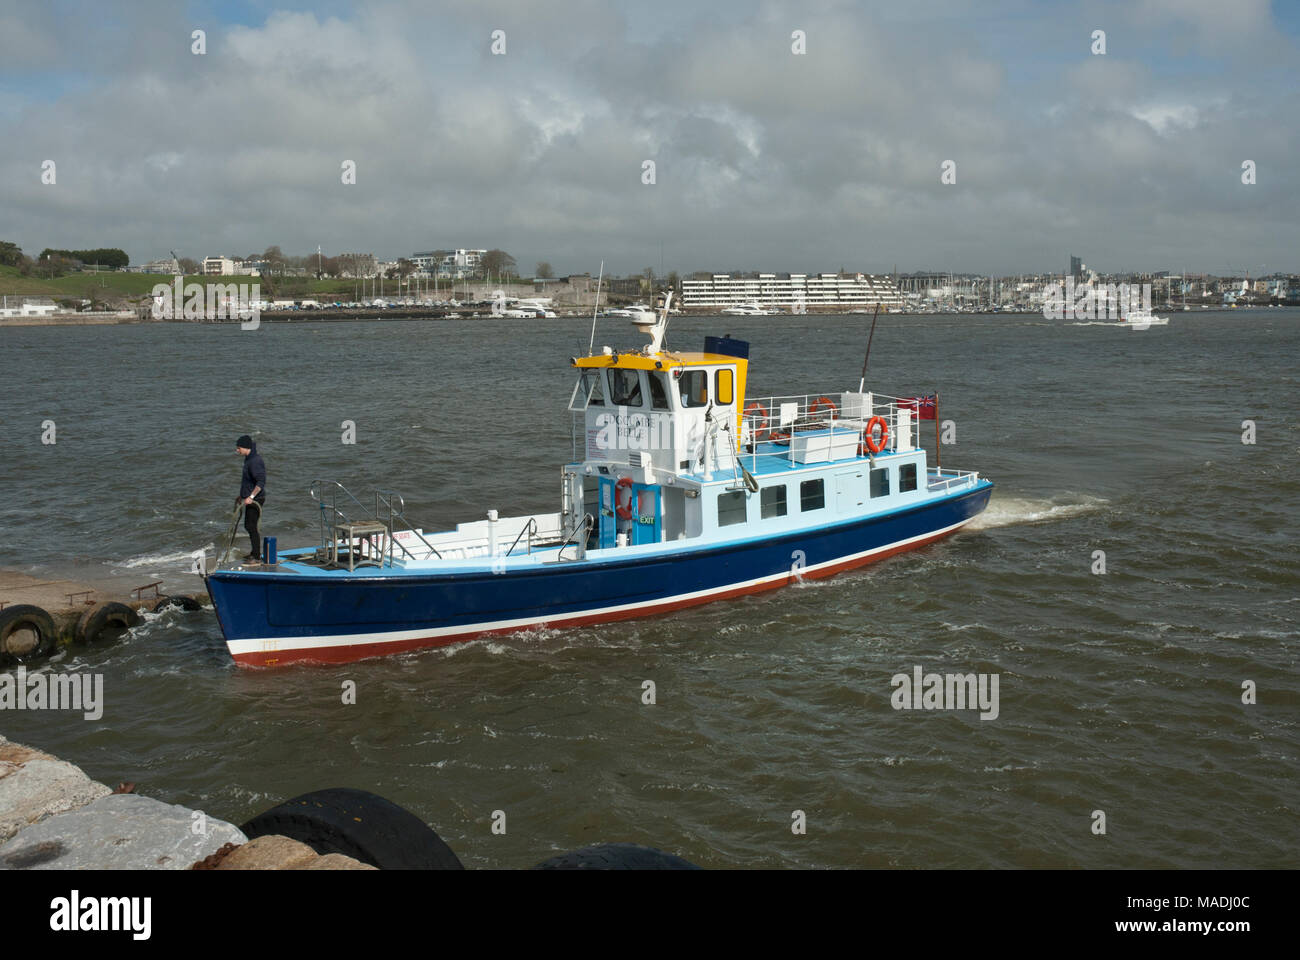 The Cremyll passenger Ferry crossing the Tamar from Plymouth in devon to Cremyll/ Mount Edgcumbe in Cornwall. Stock Photo